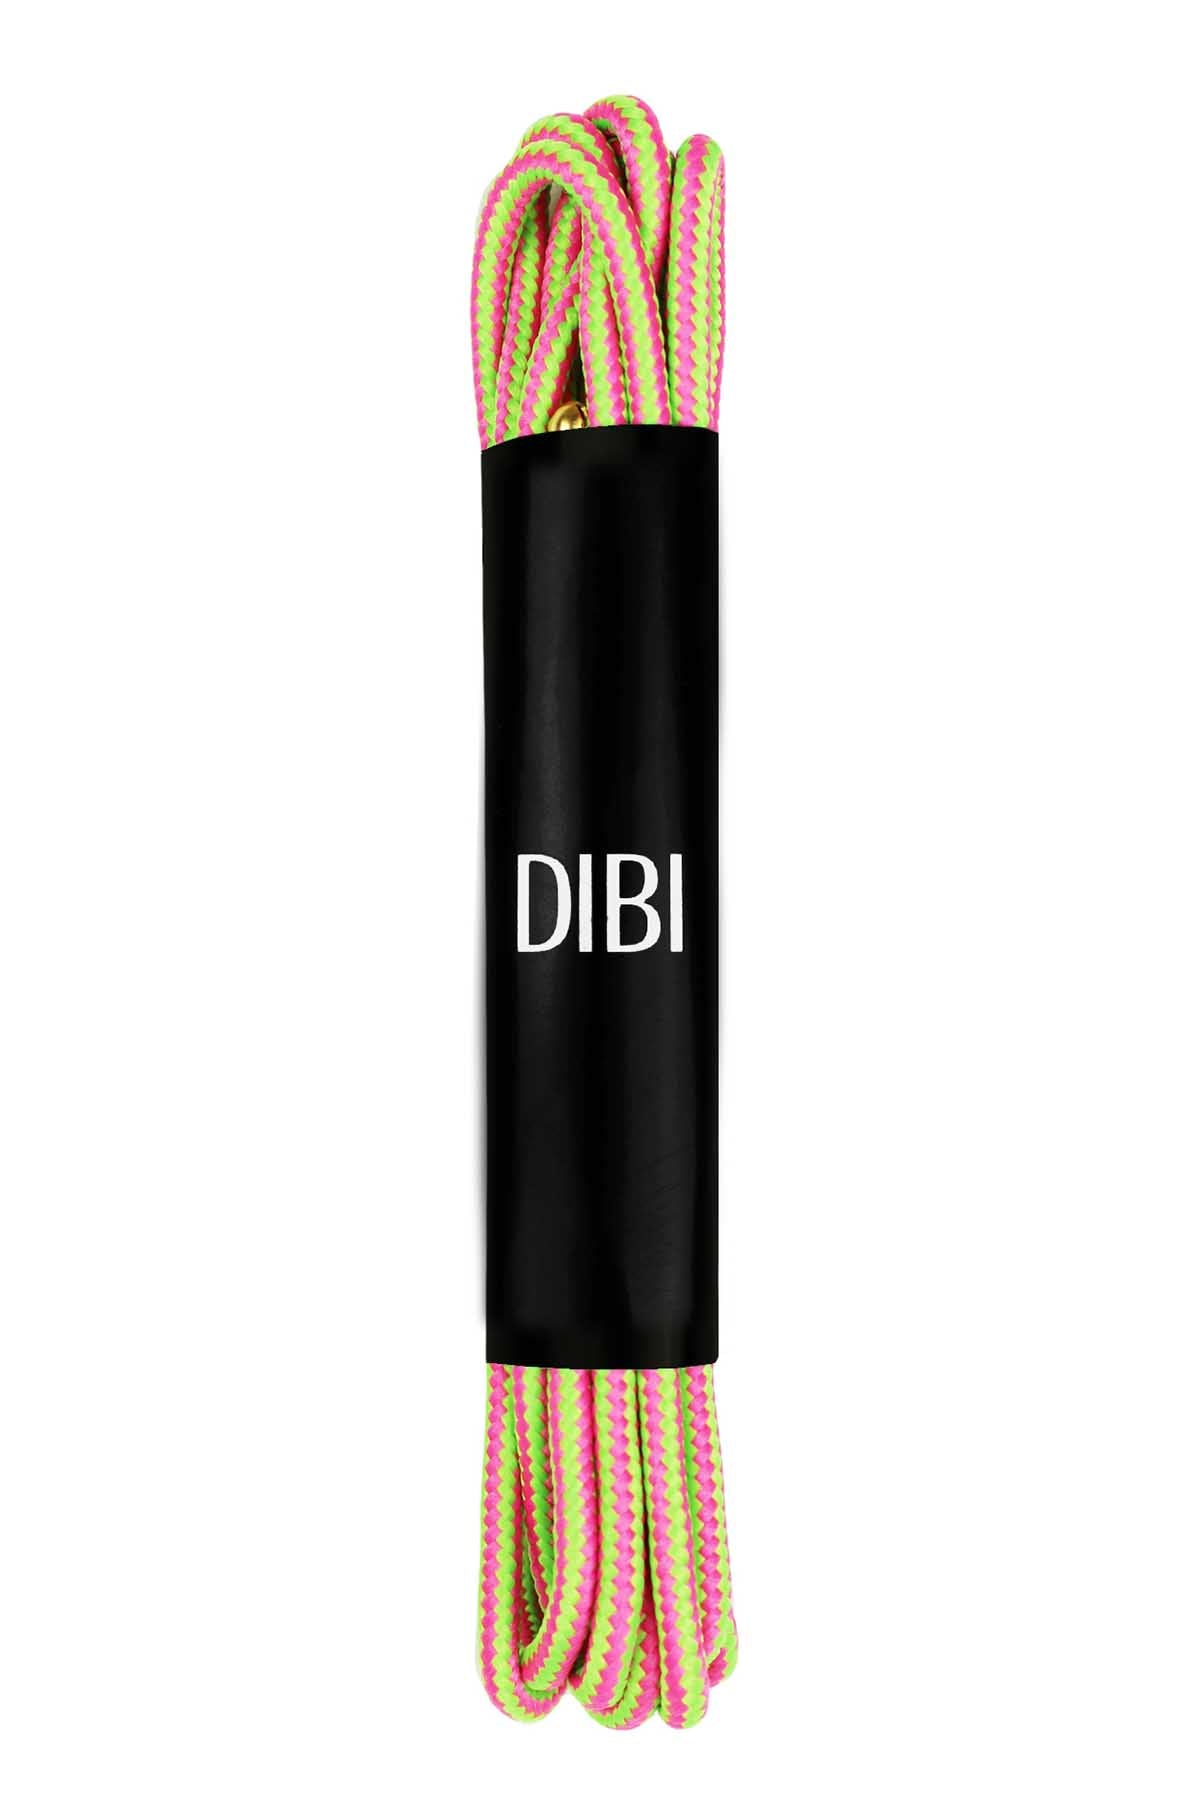 DIBI Bright-Green/Pink Striped Dress Shoelaces w/ Gold Aglets